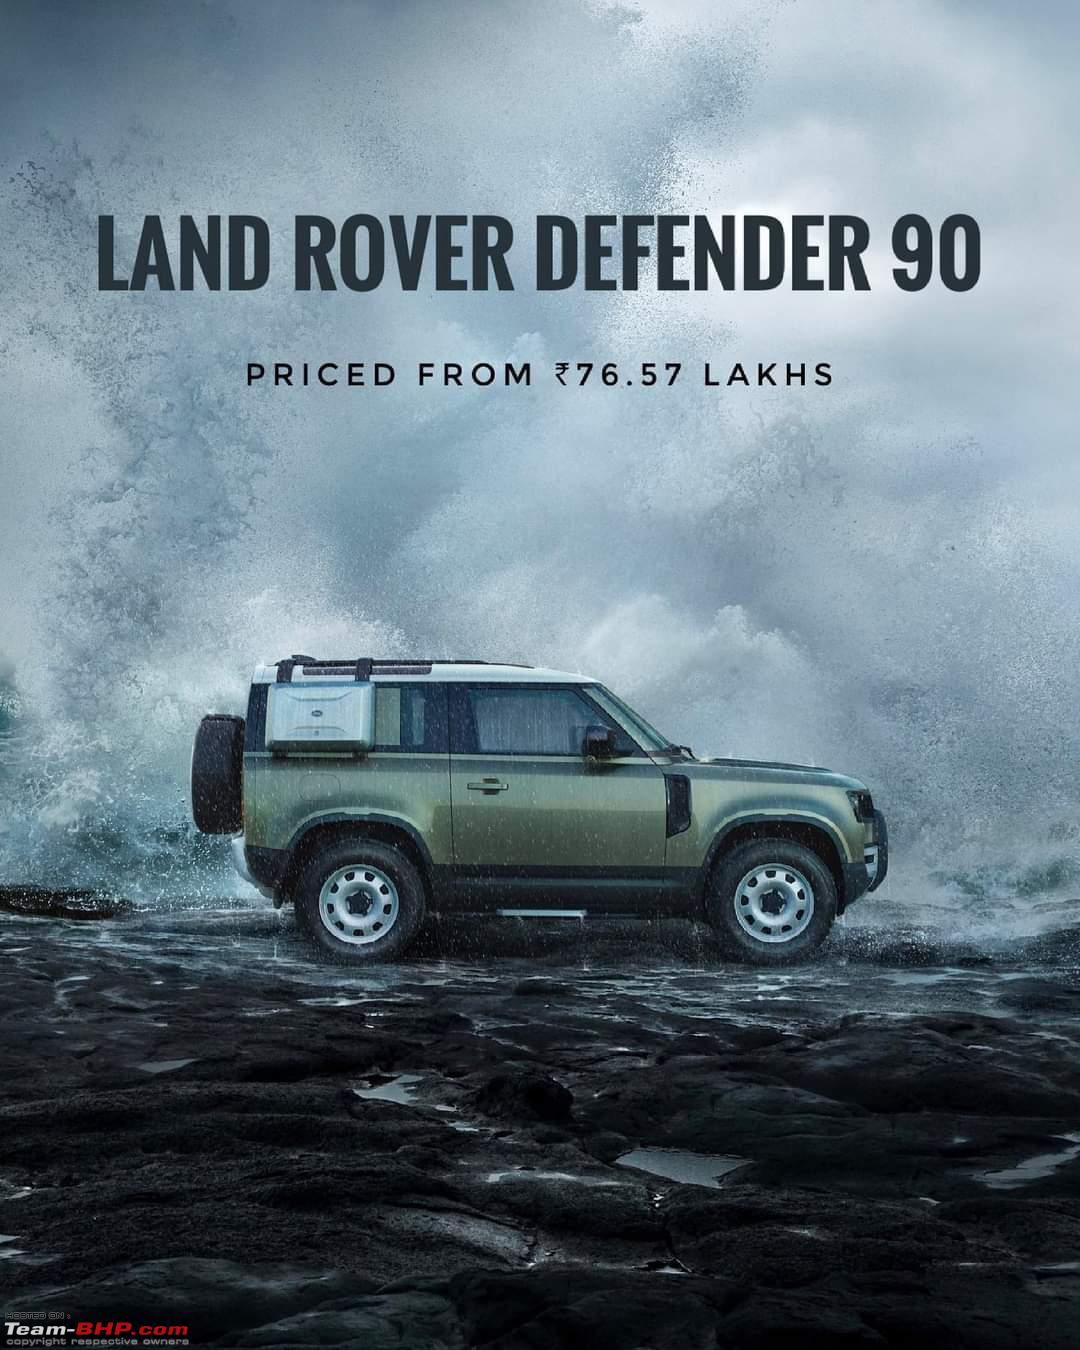 2021 Land Rover Defender 90 launched at Rs. 76.57 lakh - Team-BHP